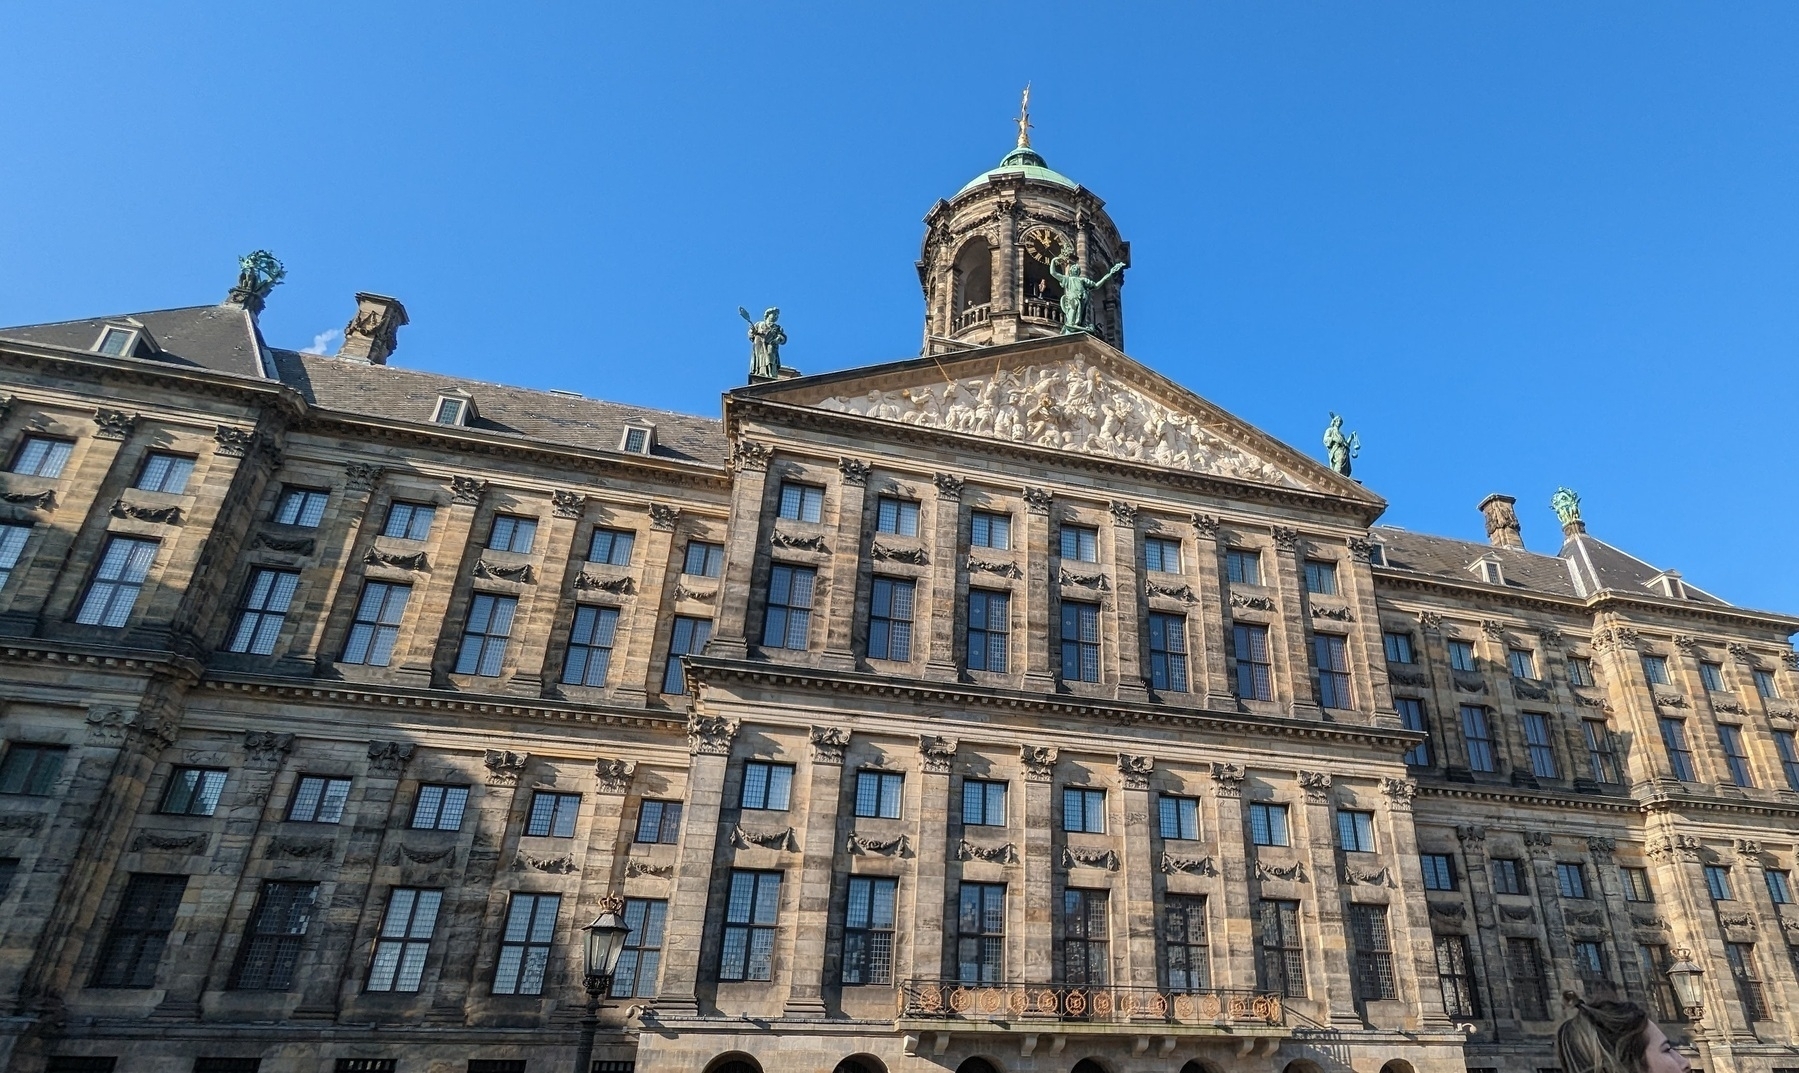 The facade of the Royal Palace Amsterdam.